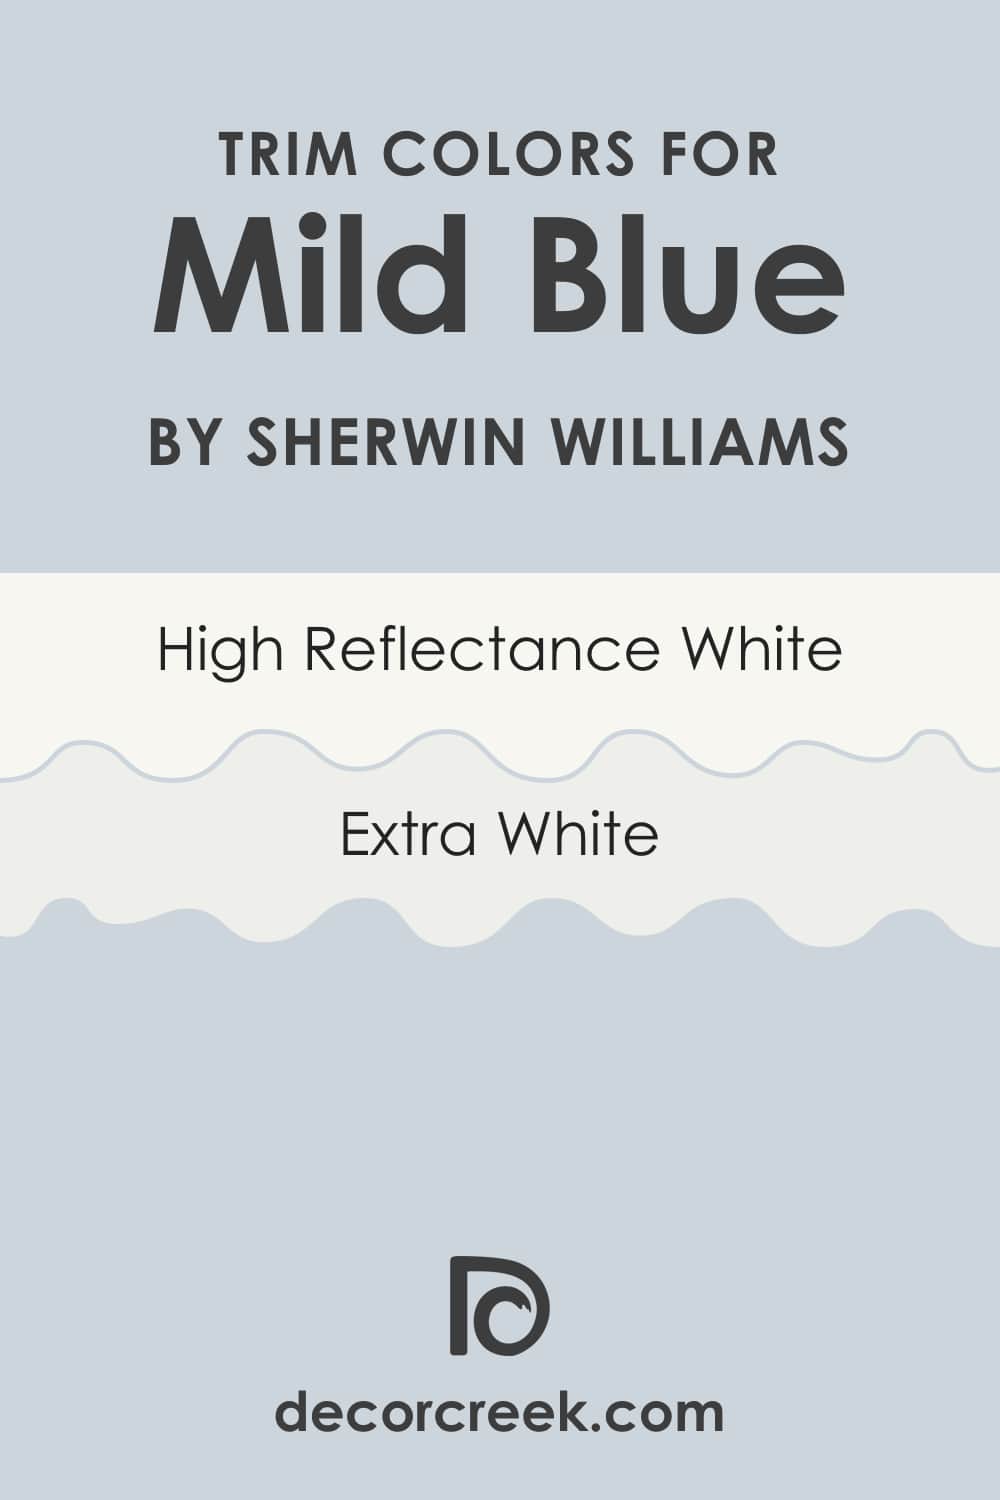 What Is the Best Trim Color of Mild Blue SW-6533 ?